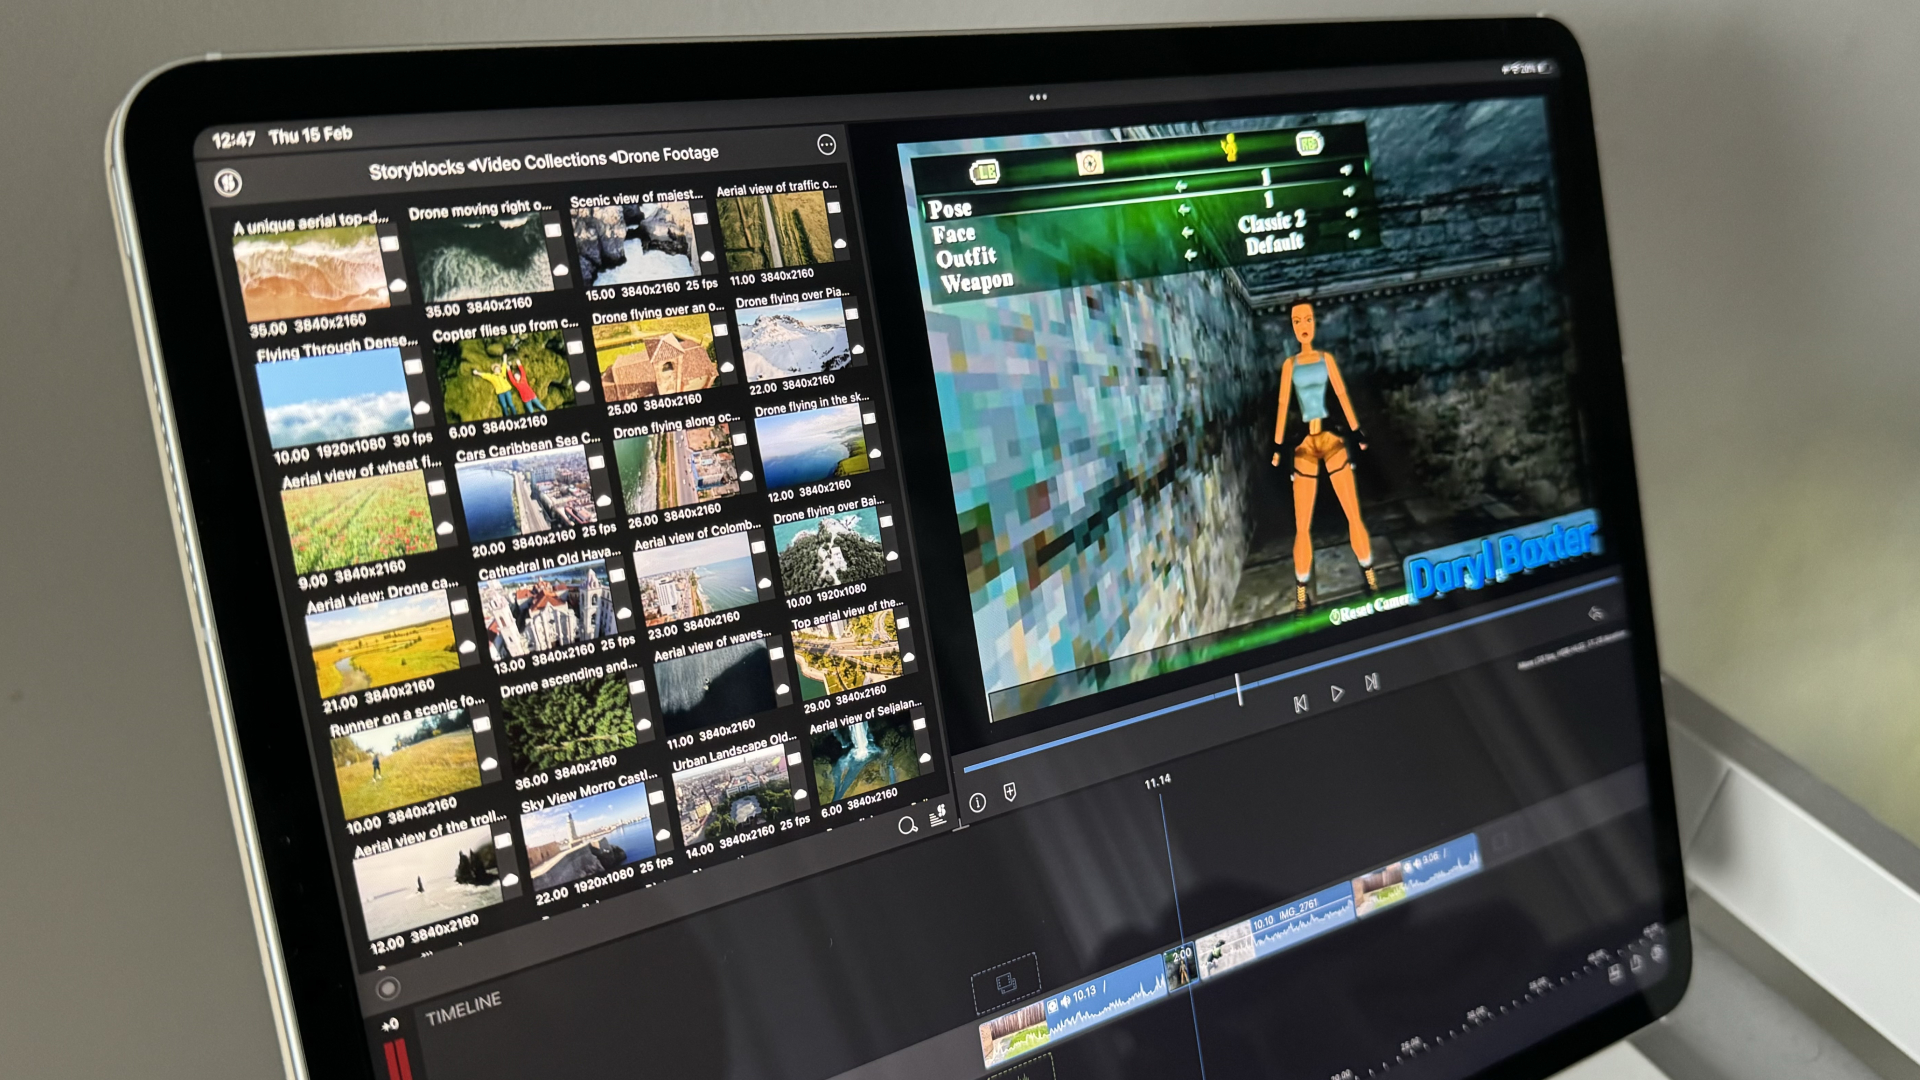 "I knew at that moment that video editing was what I wanted to do with my life" LumaFusion co-founder on Vision Pro, rivals, and the future of video editing as the app celebrates its 10th anniversary